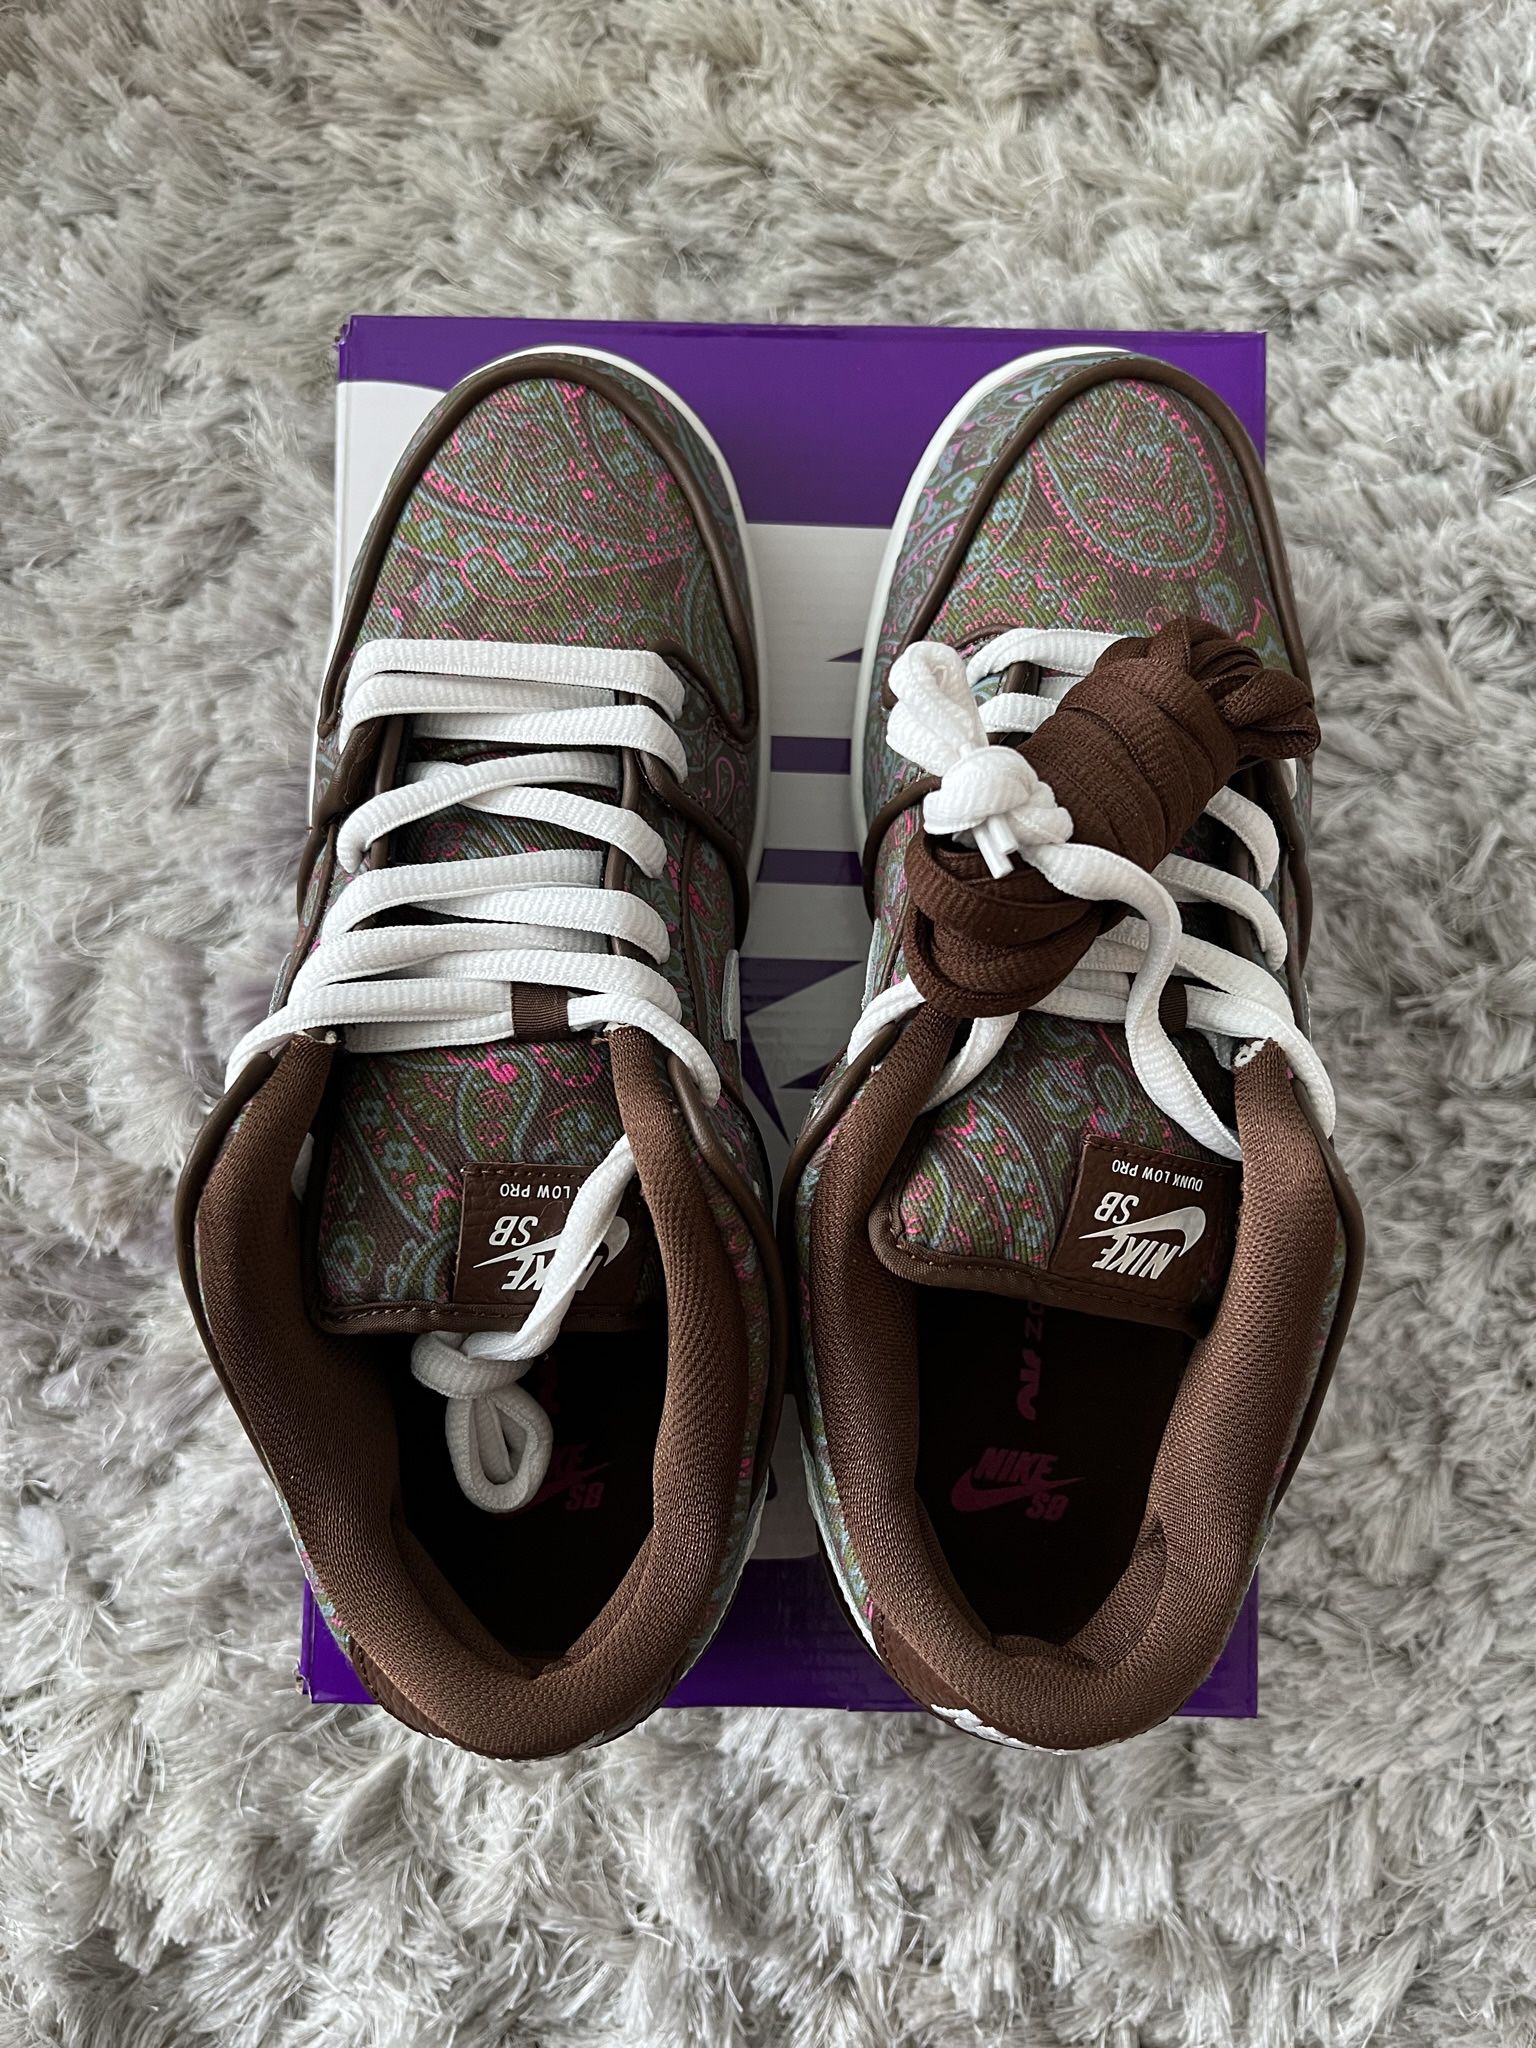 Nike SB Dunk Low Brown Paisley Size 10.5 Brand New